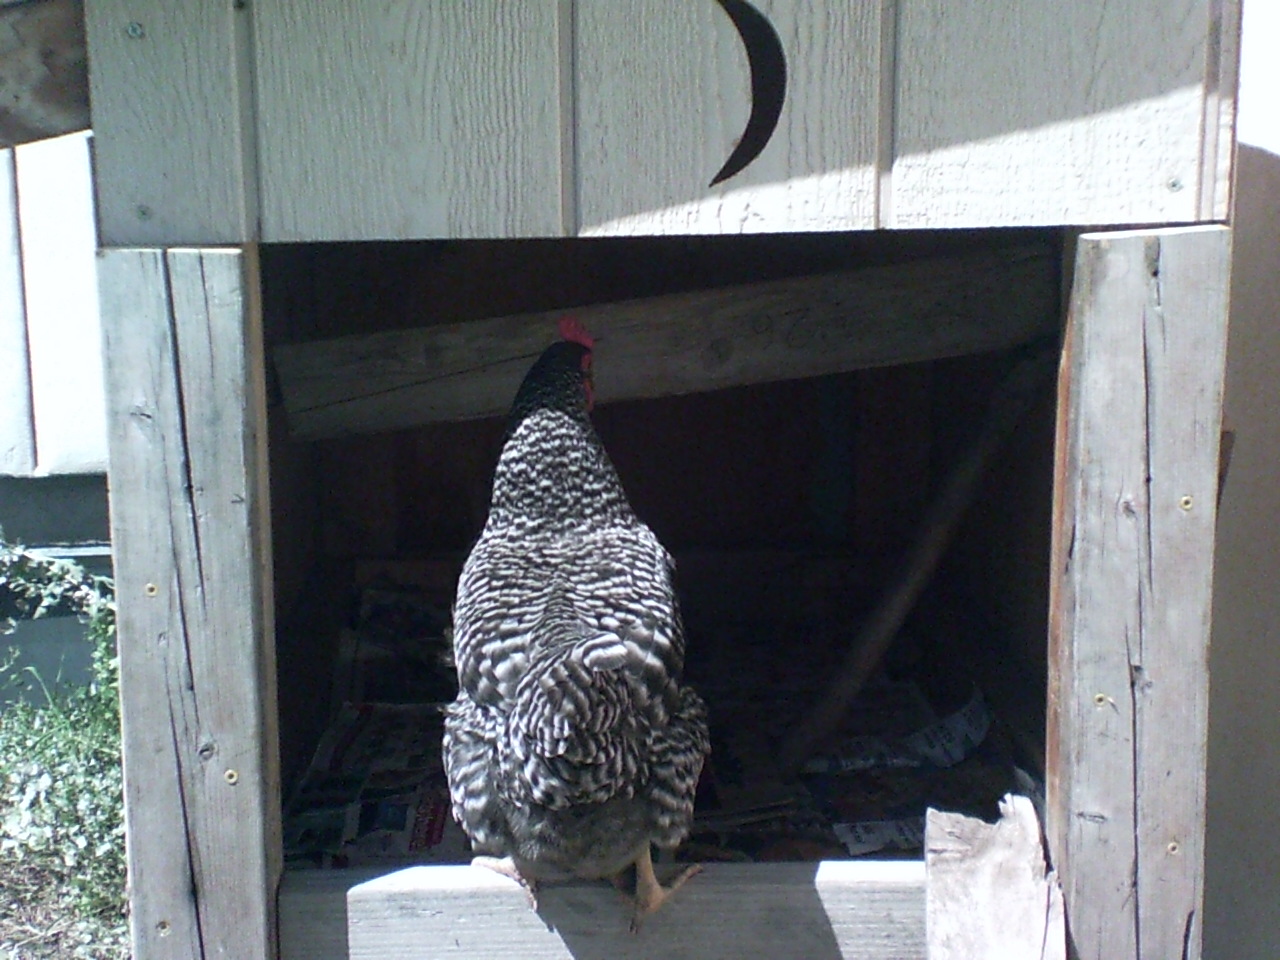 Chloe's turn to check out the new coop